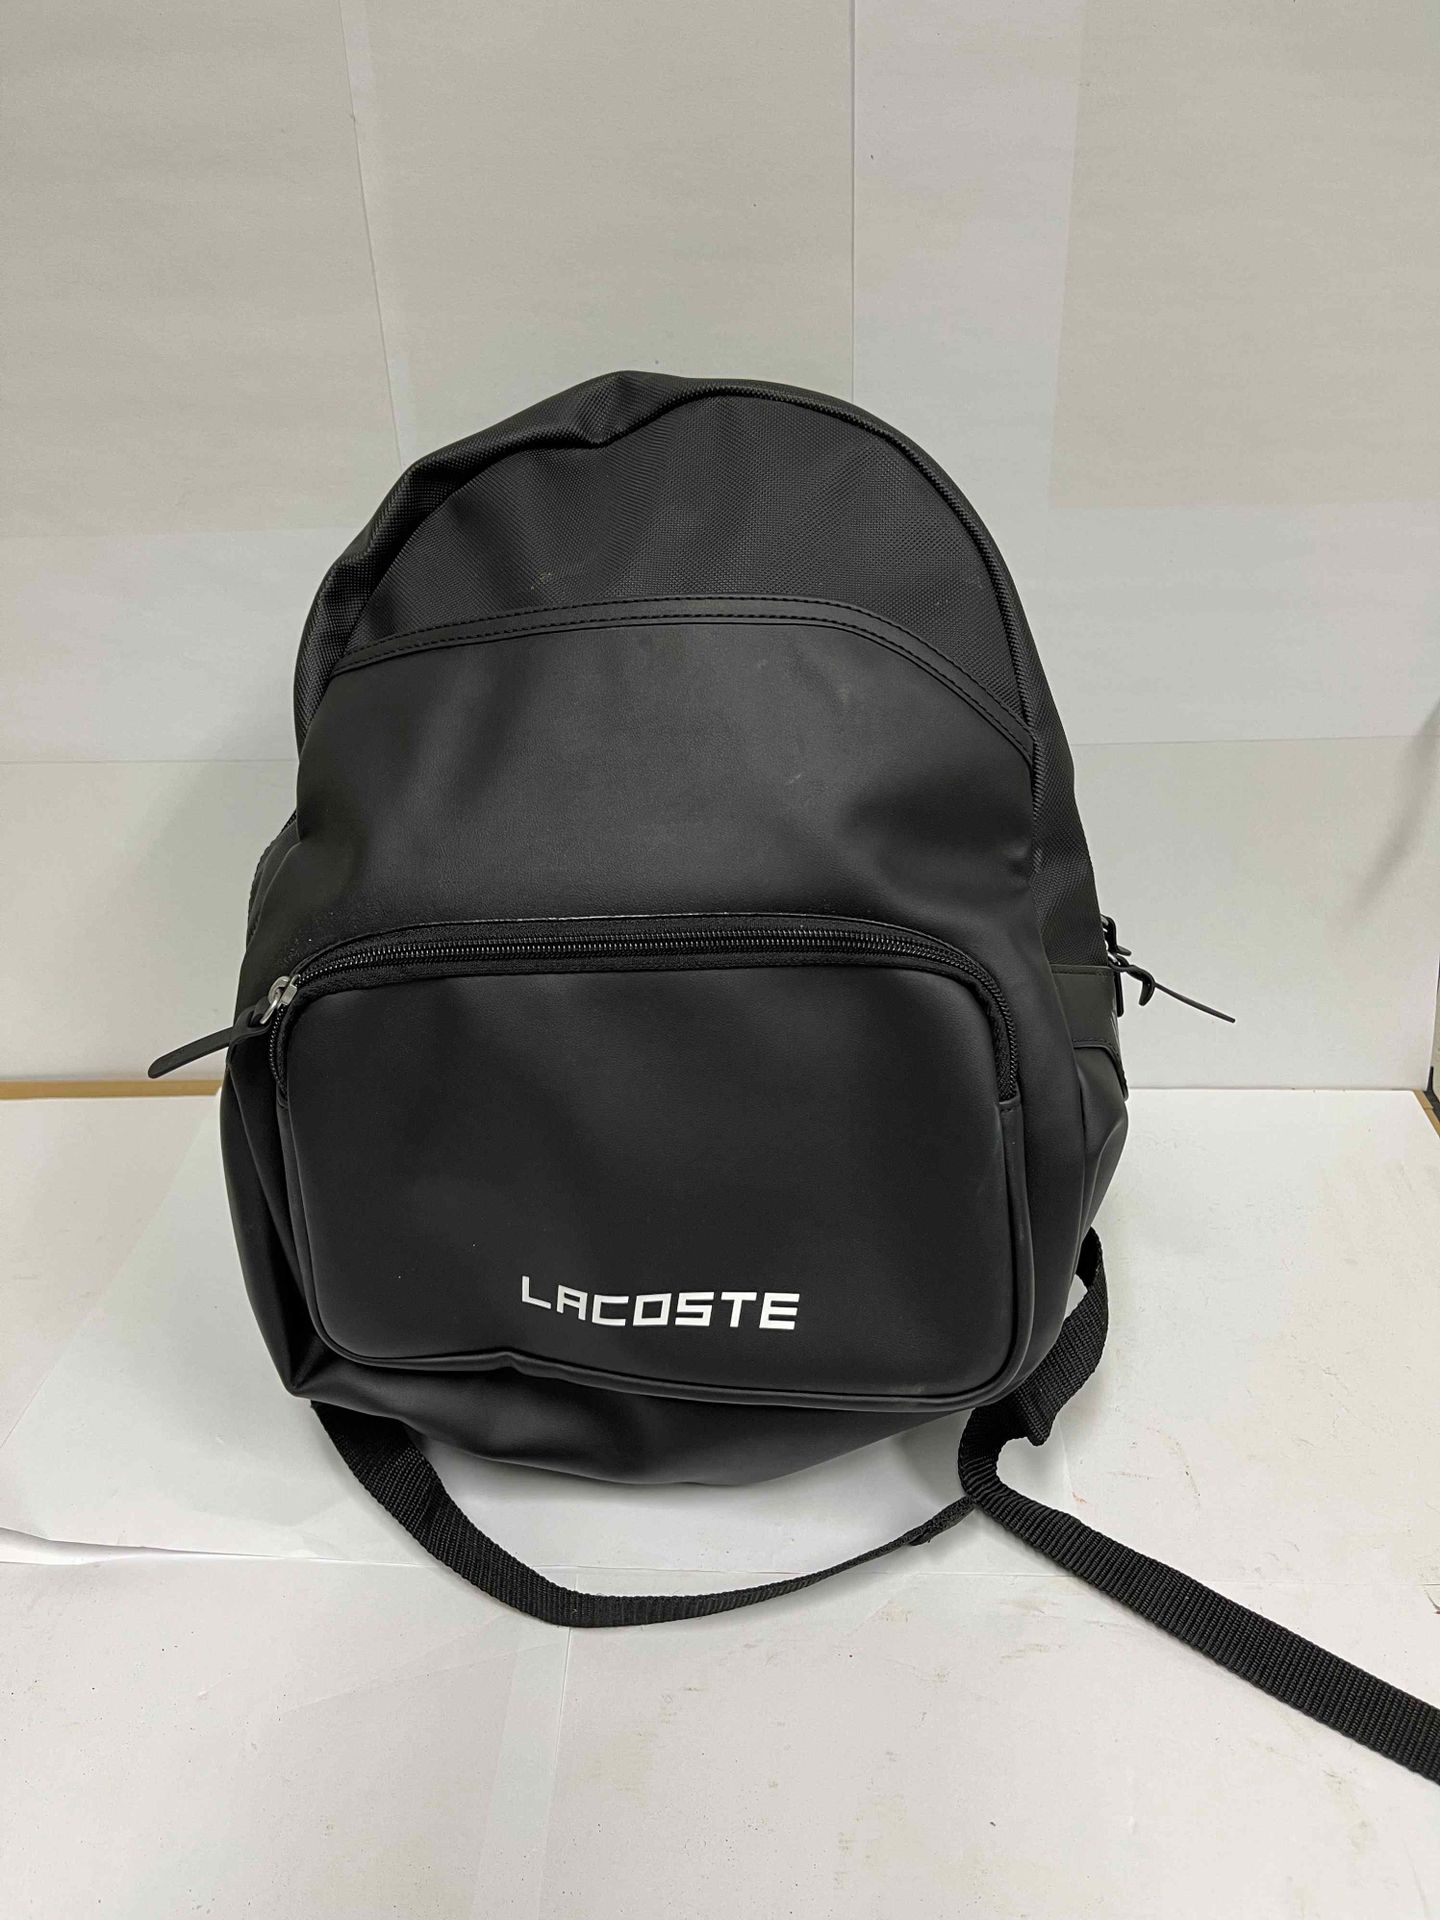 lacoste backpack with dust bag in excellent condition